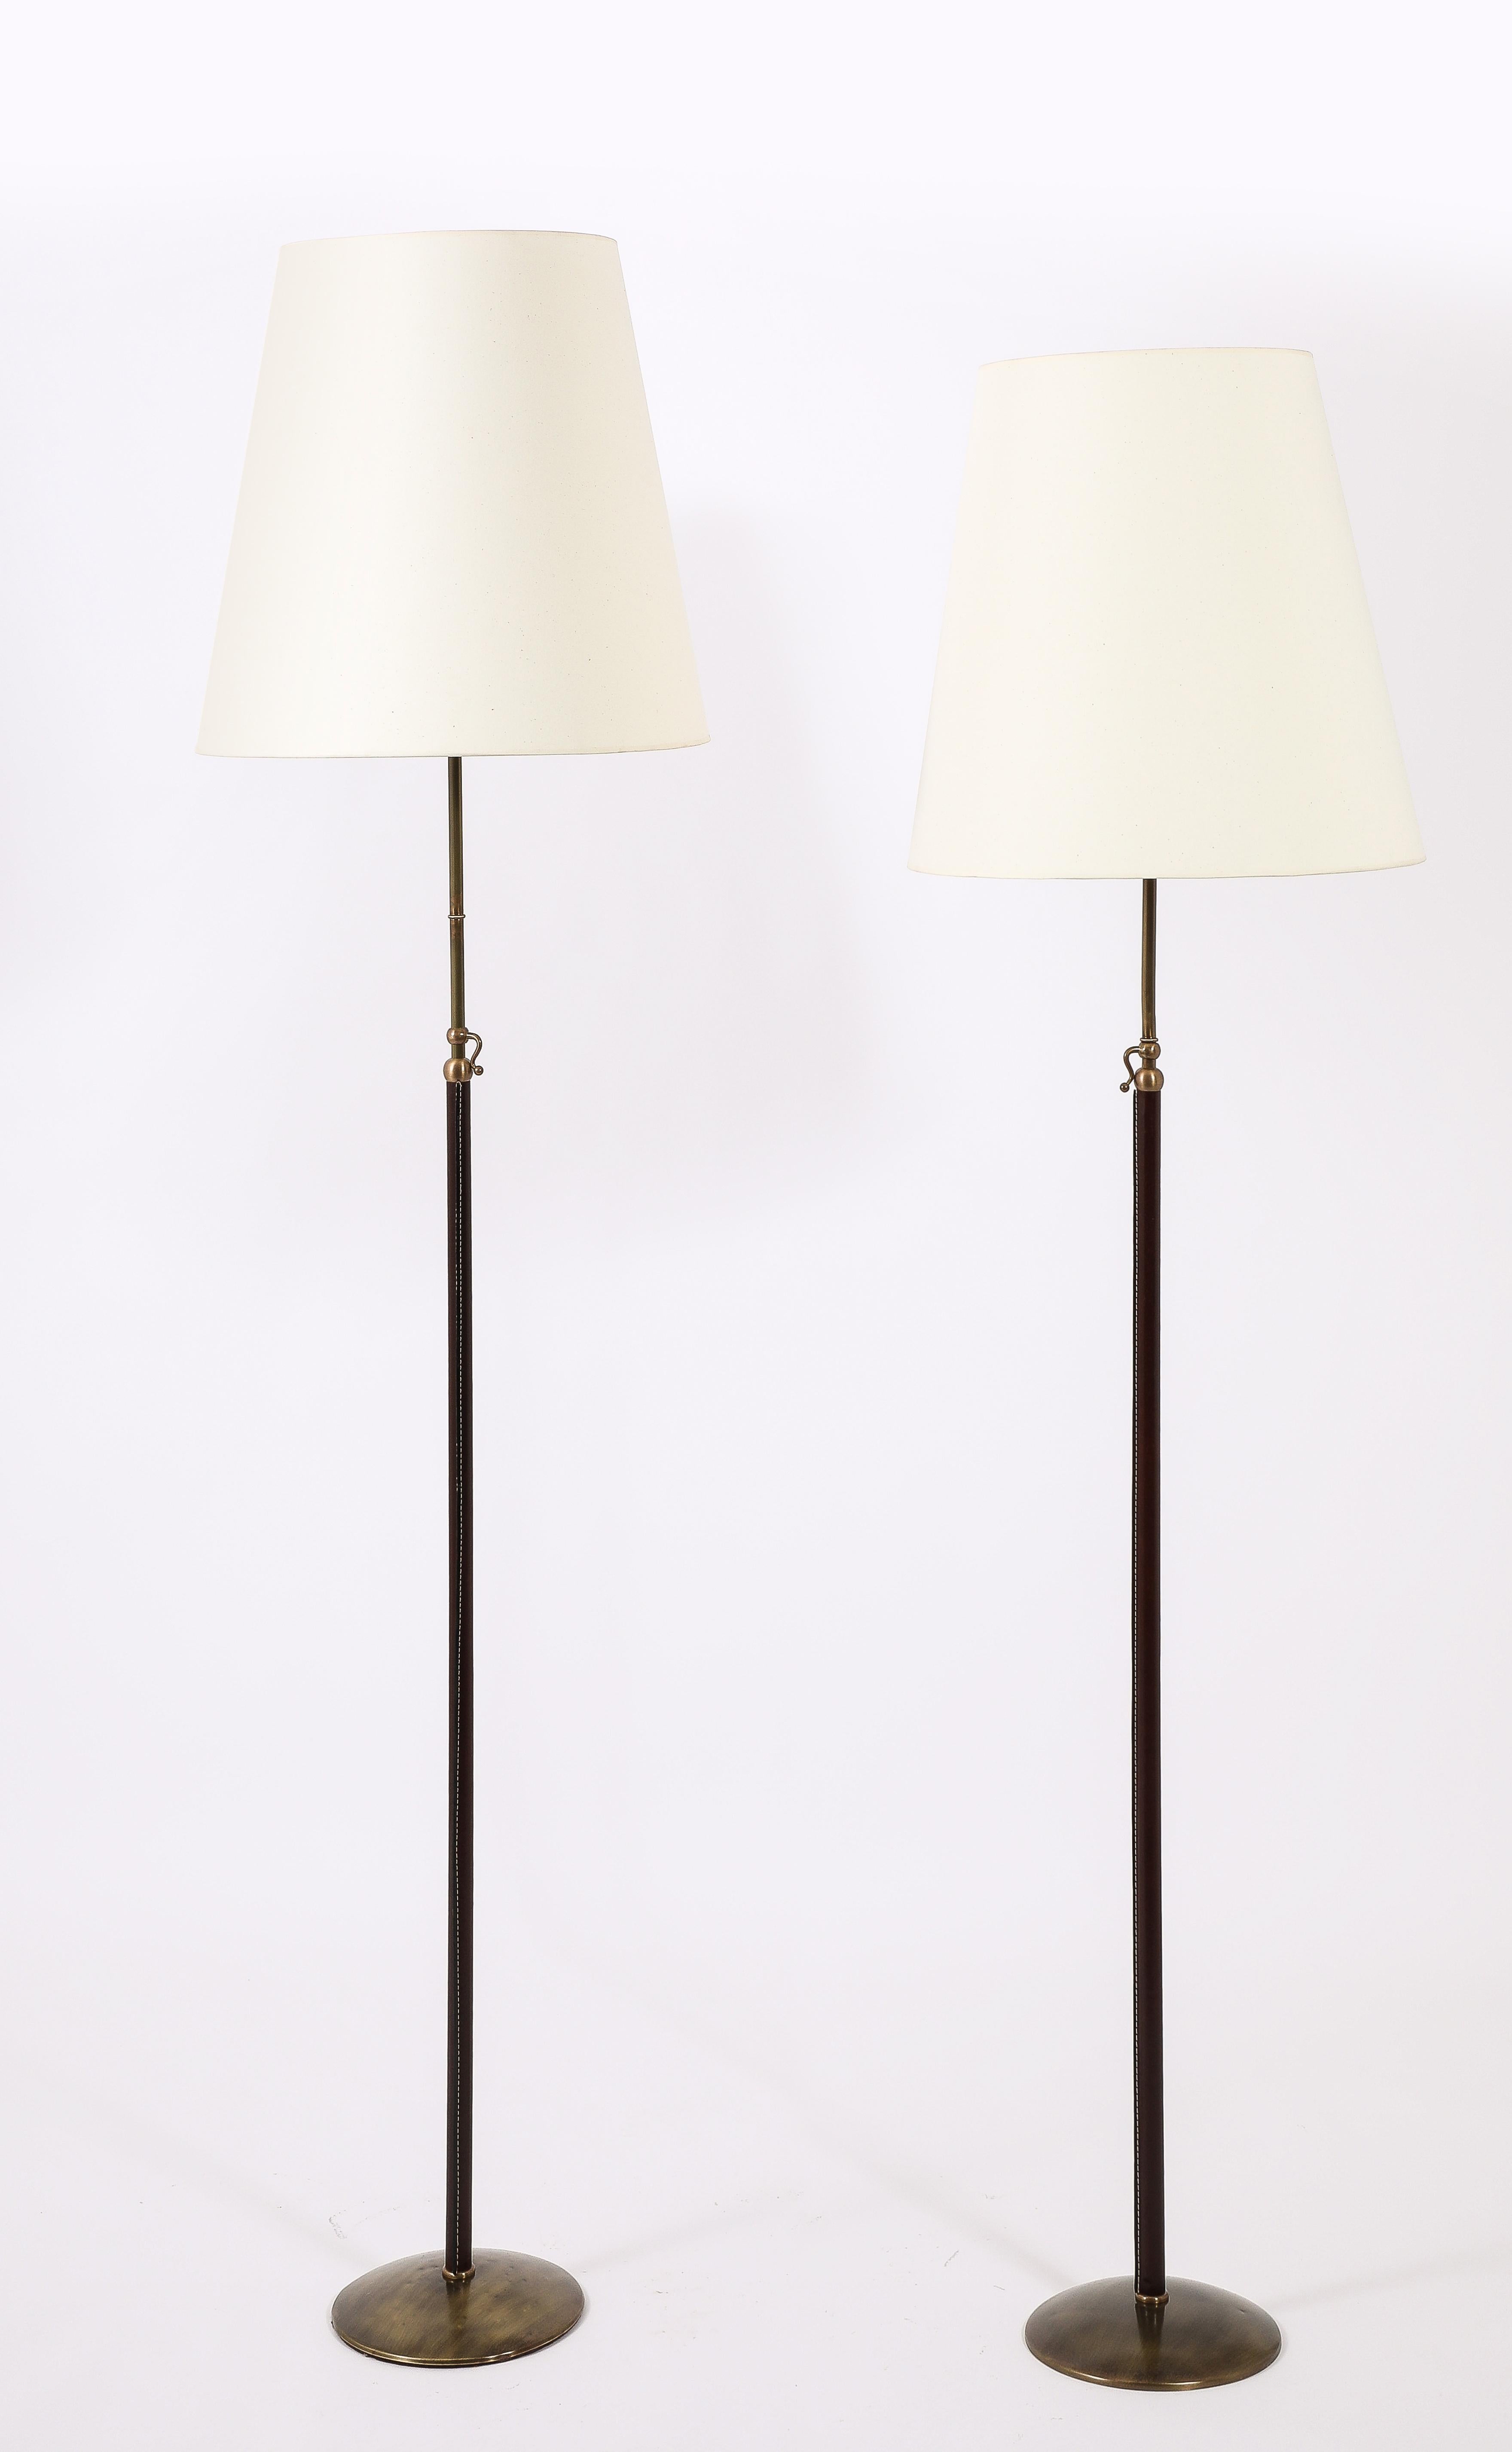 MetalArte Brass & Stitched Brown Leather Floor Lamps, Spain 1960's In Good Condition For Sale In New York, NY